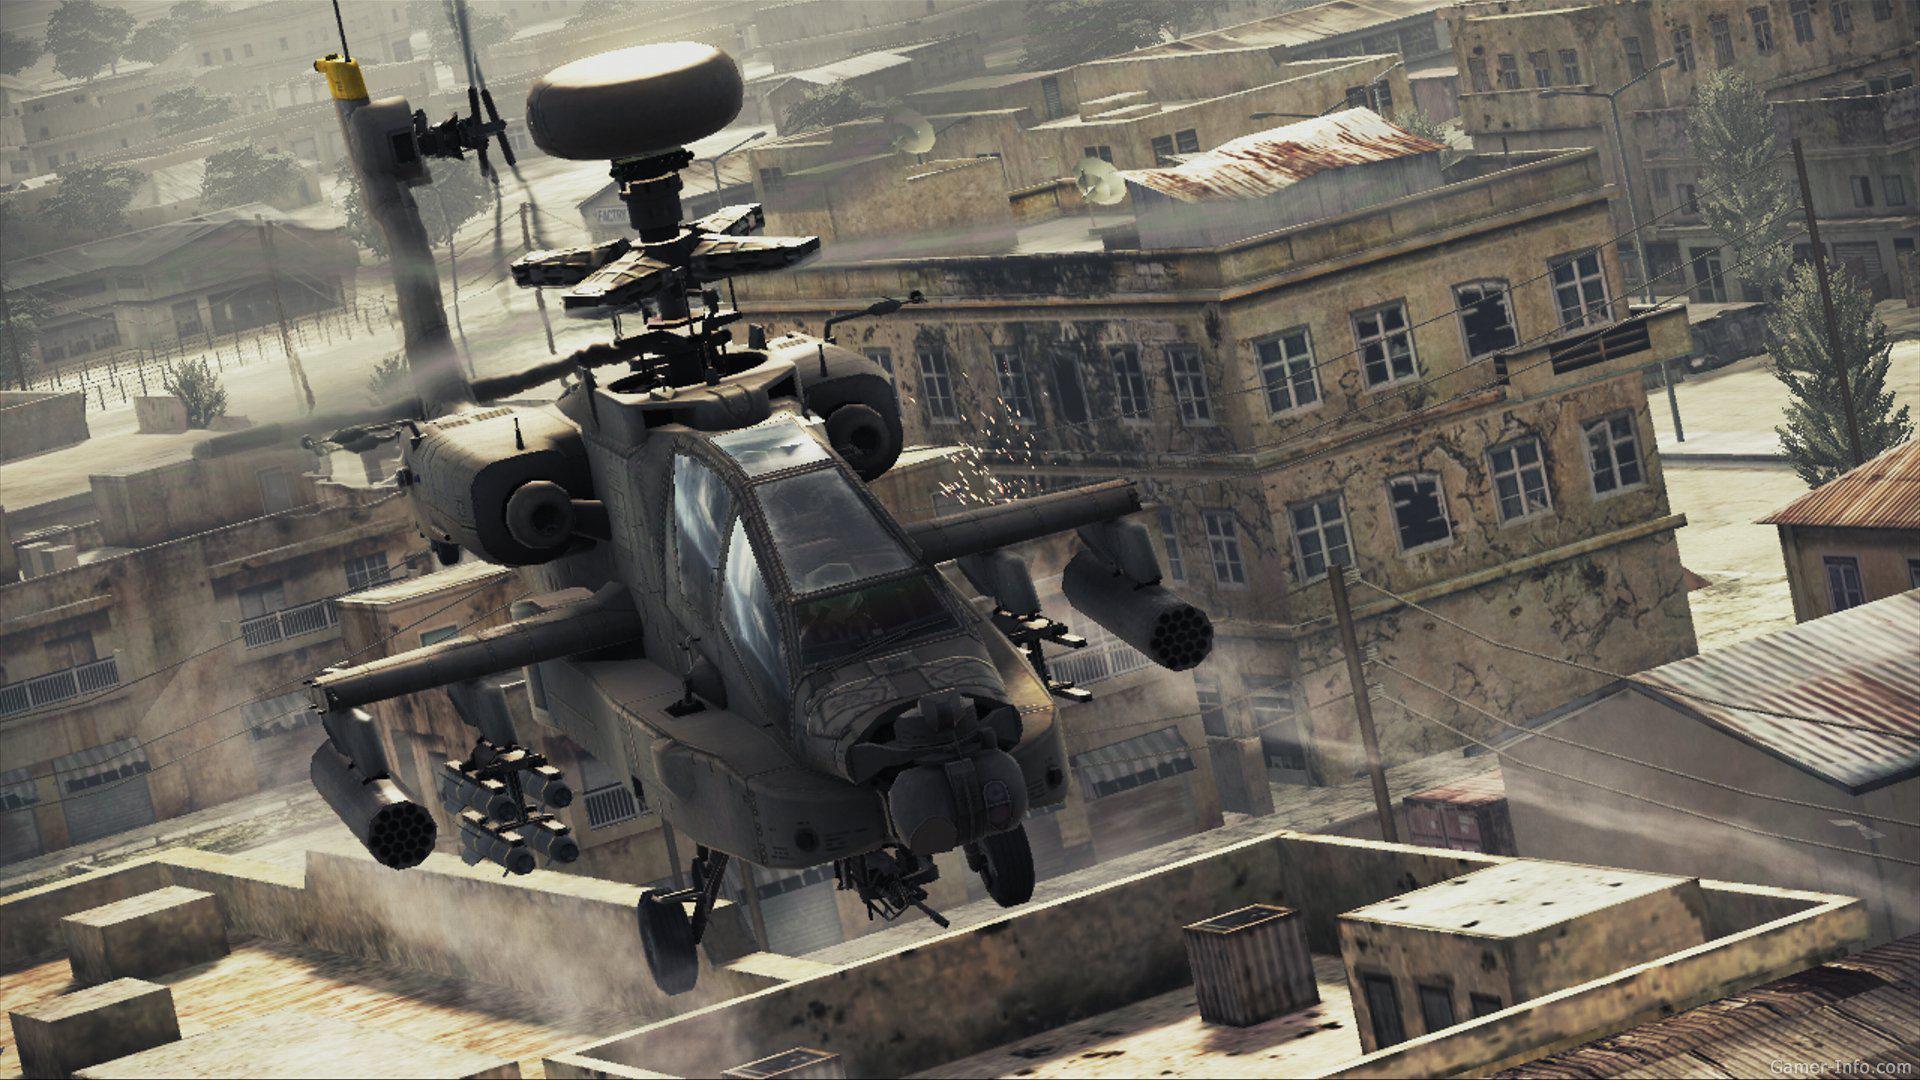 HD Ah 64 Apache Helicopter Army Military Weapon Download Wallpaper